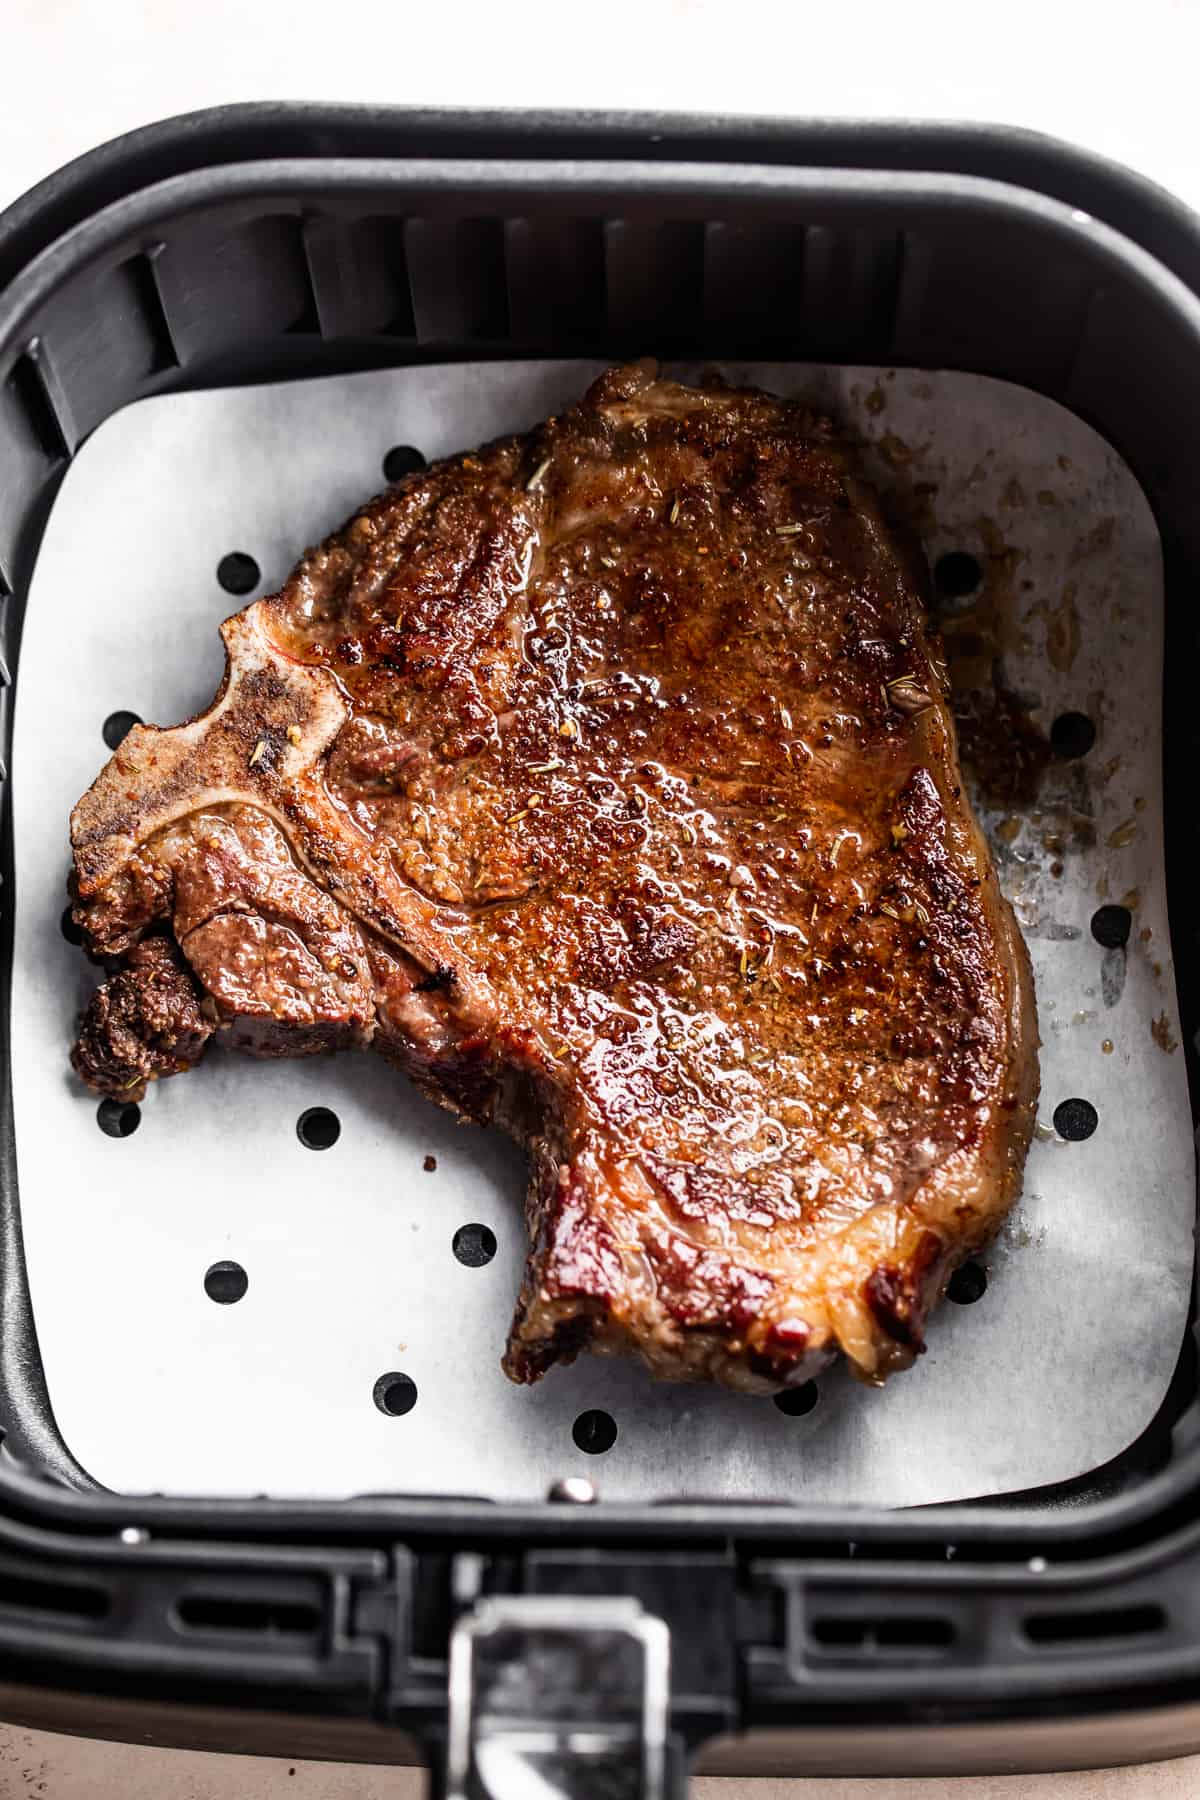 A cooked steak in an air fryer basket